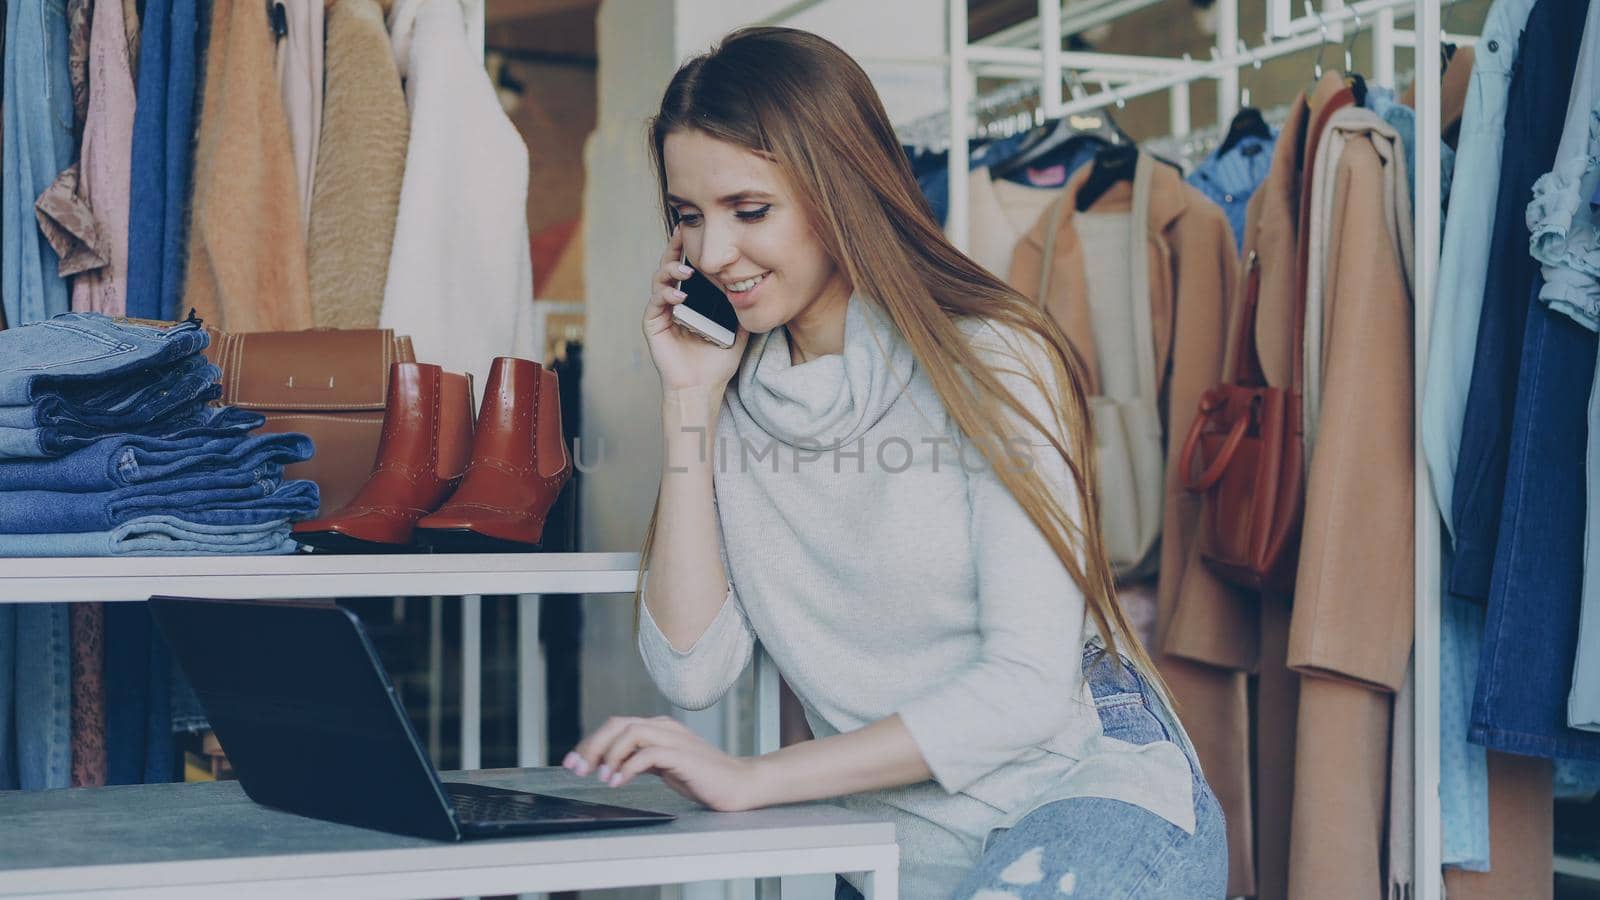 Young businesswoman is working with laptop and talking on mobile phone in her shop. Clothes and customer in background. Small business concept. by silverkblack